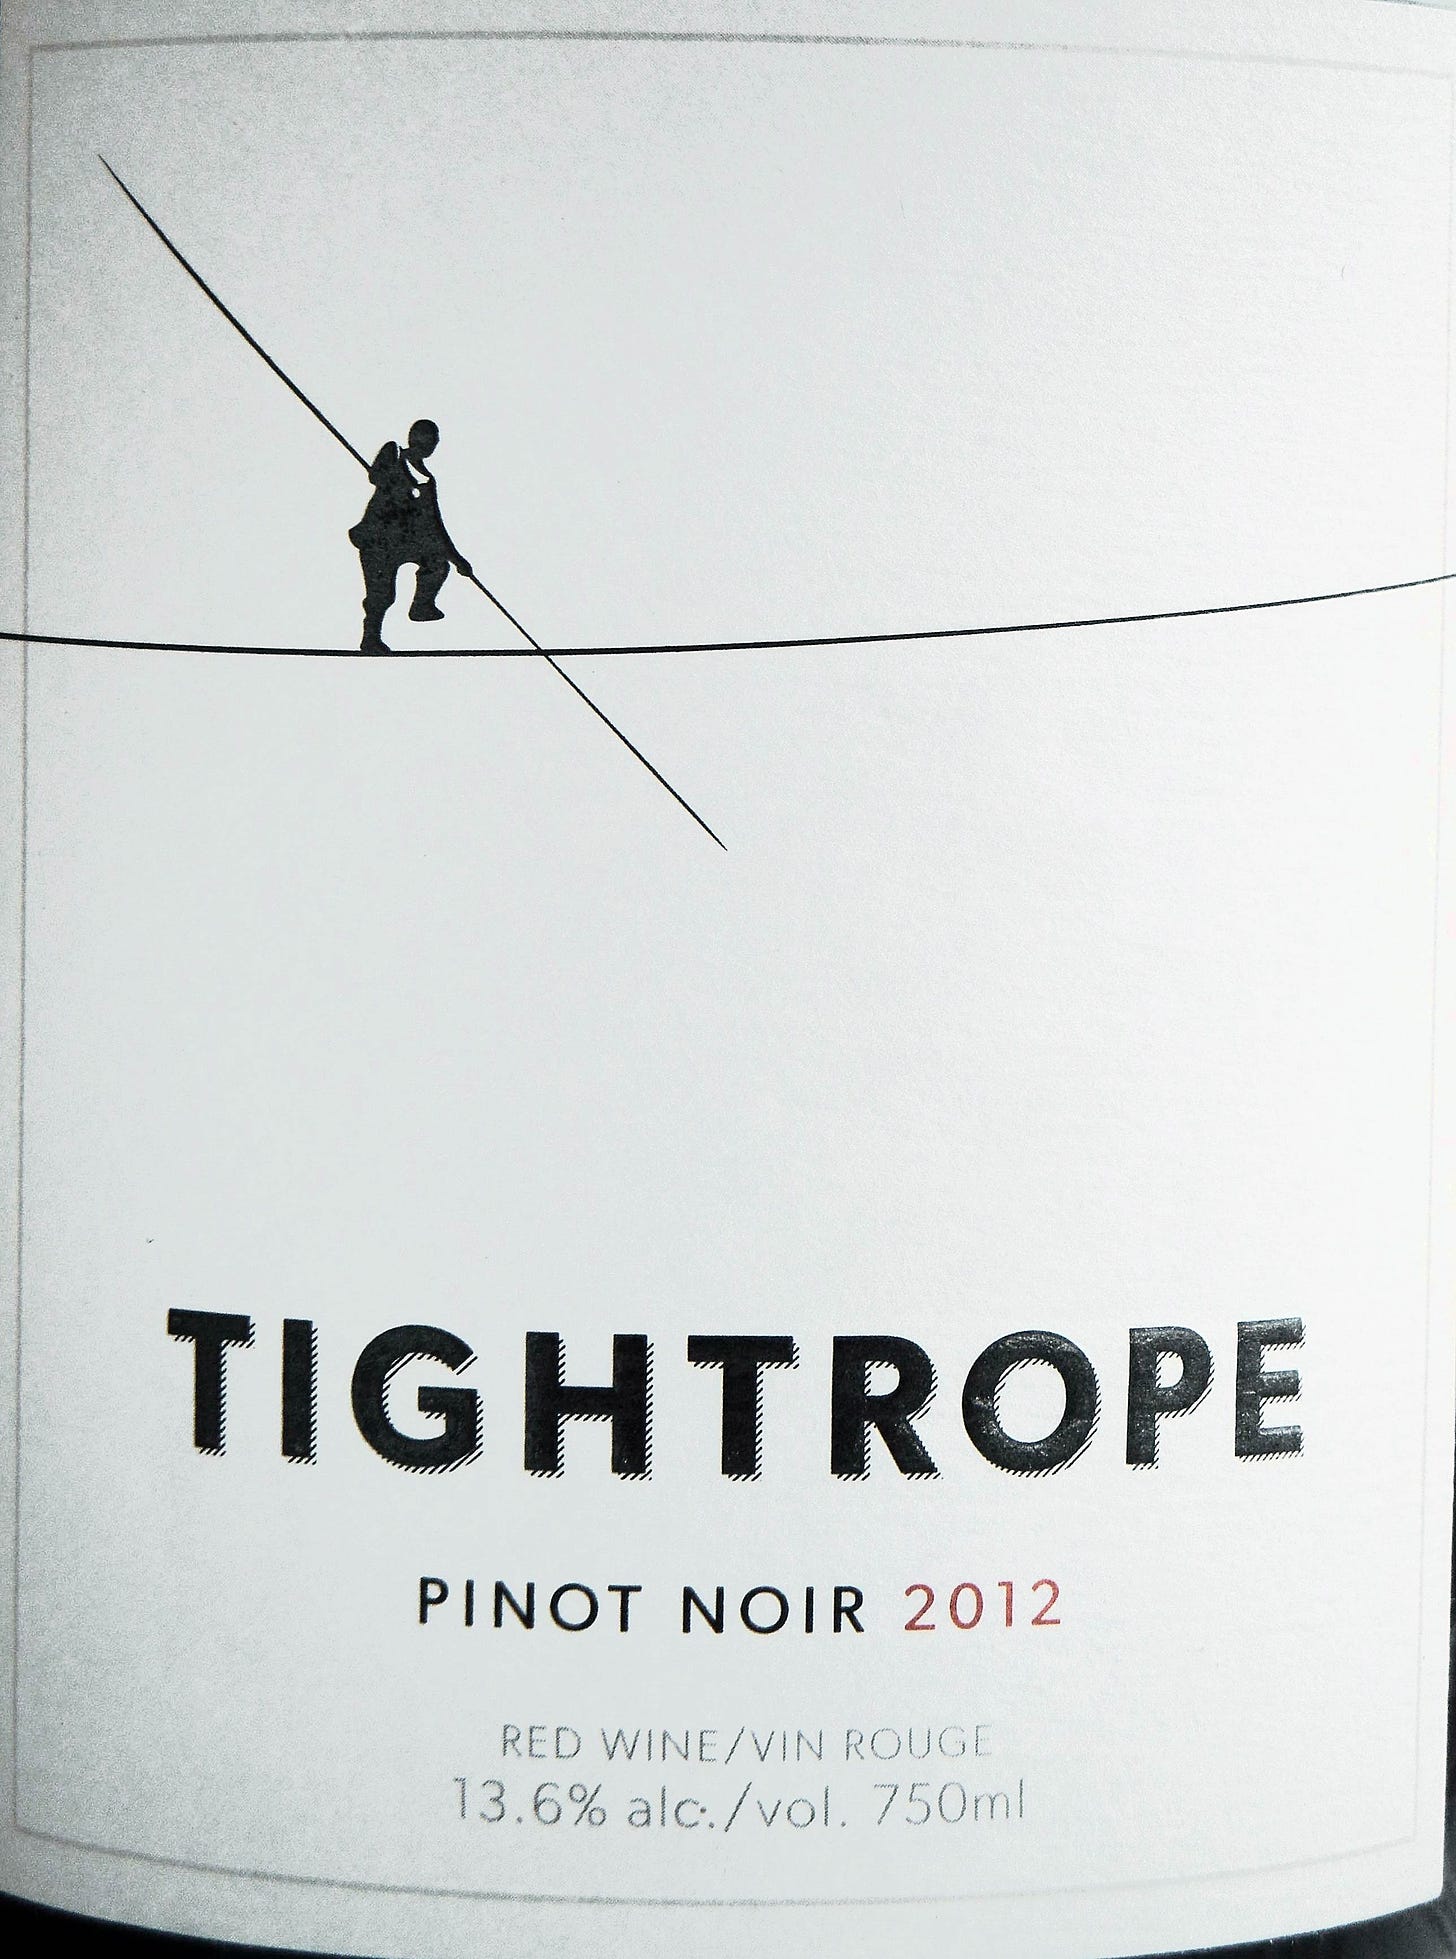 Tightrope Pinot Noir 2012 Label - BC Pinot Noir Tasting Review 19 